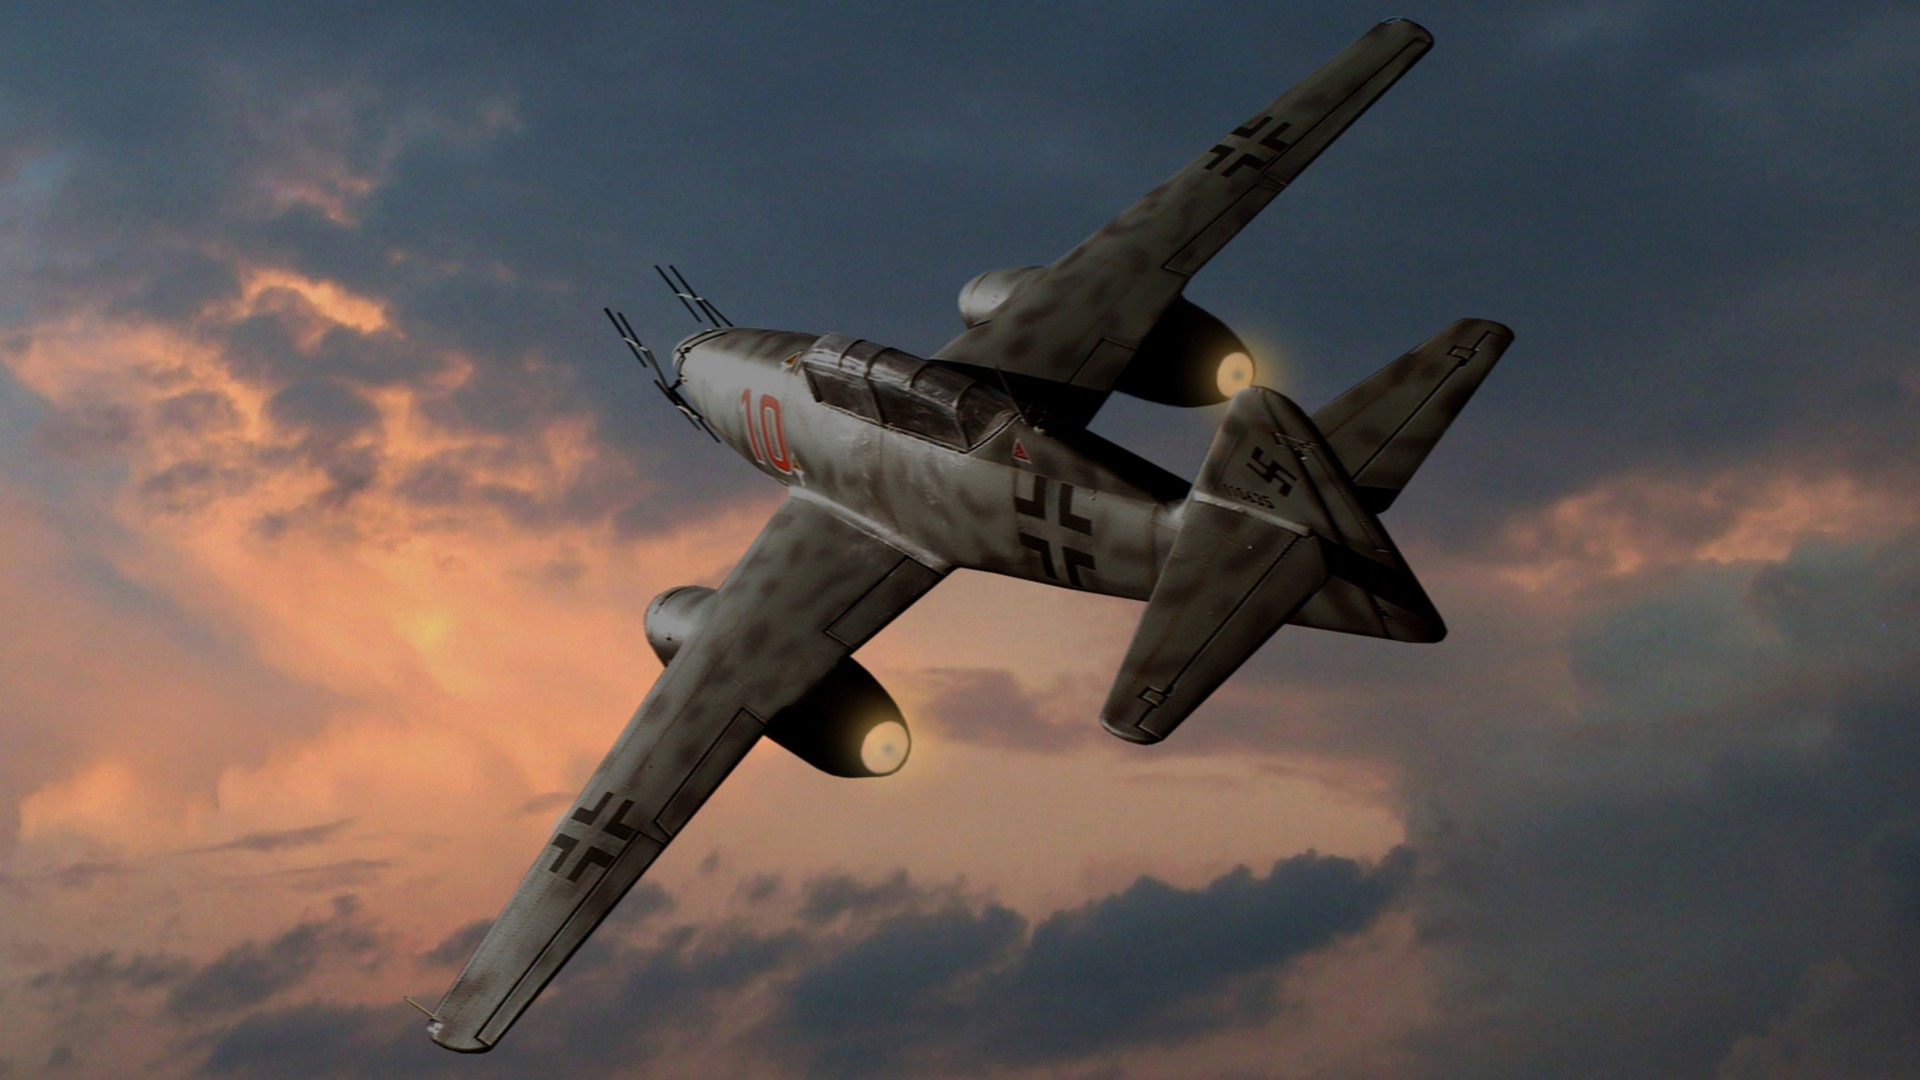 1920x1080 ... 3RD REICH LW ME 262 B1a night fighter by PanzerBob